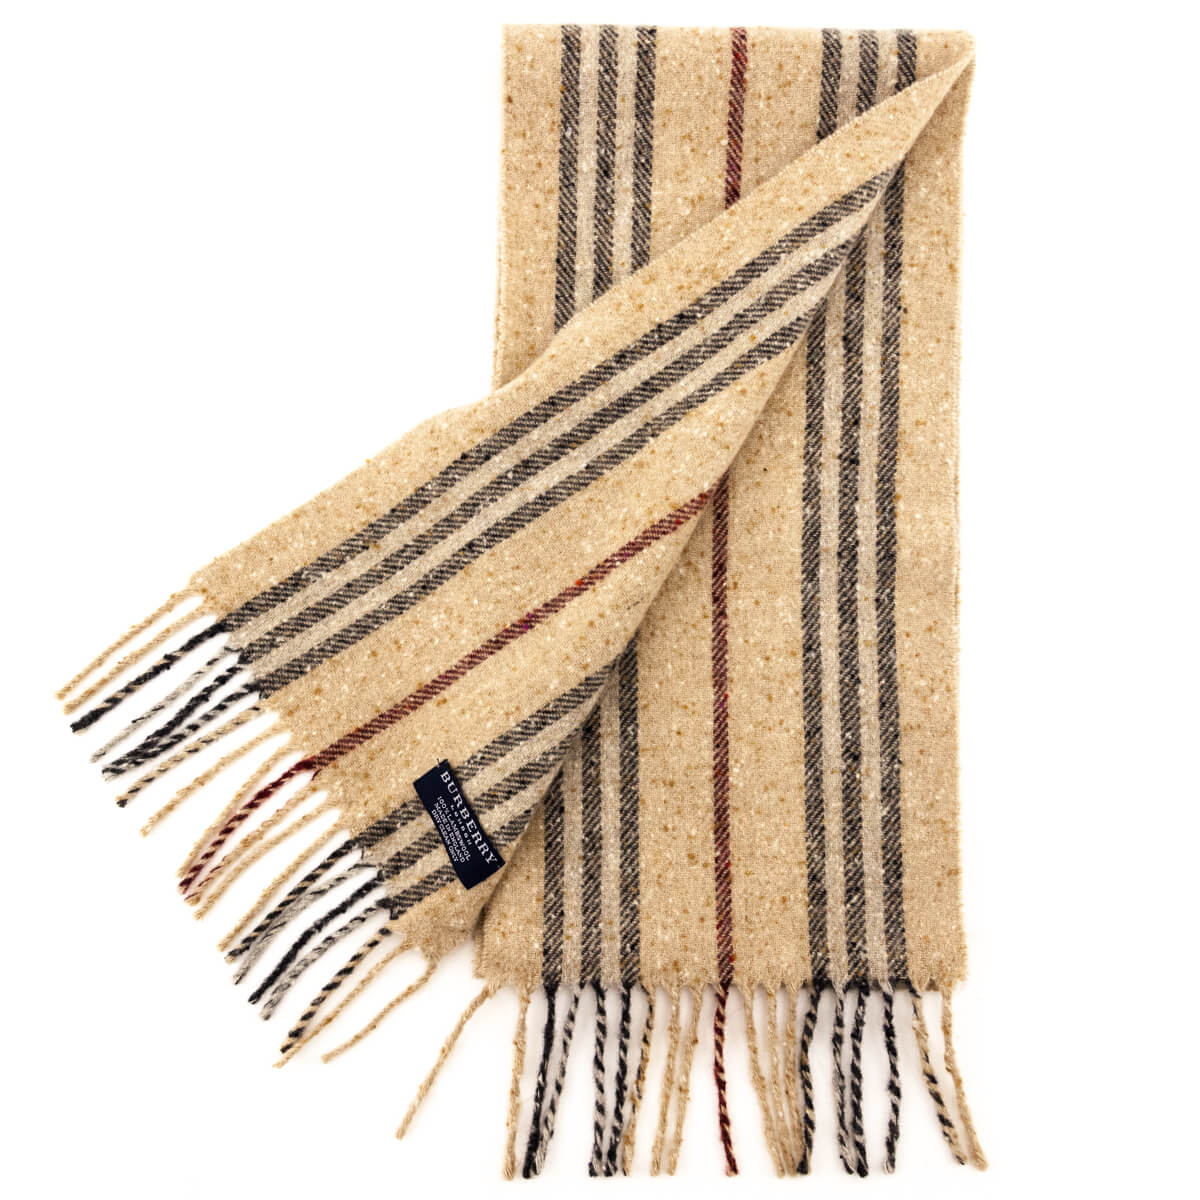 Burberry Tan Striped Lambswool Scarf - Love that Bag etc - Preowned Authentic Designer Handbags & Preloved Fashions